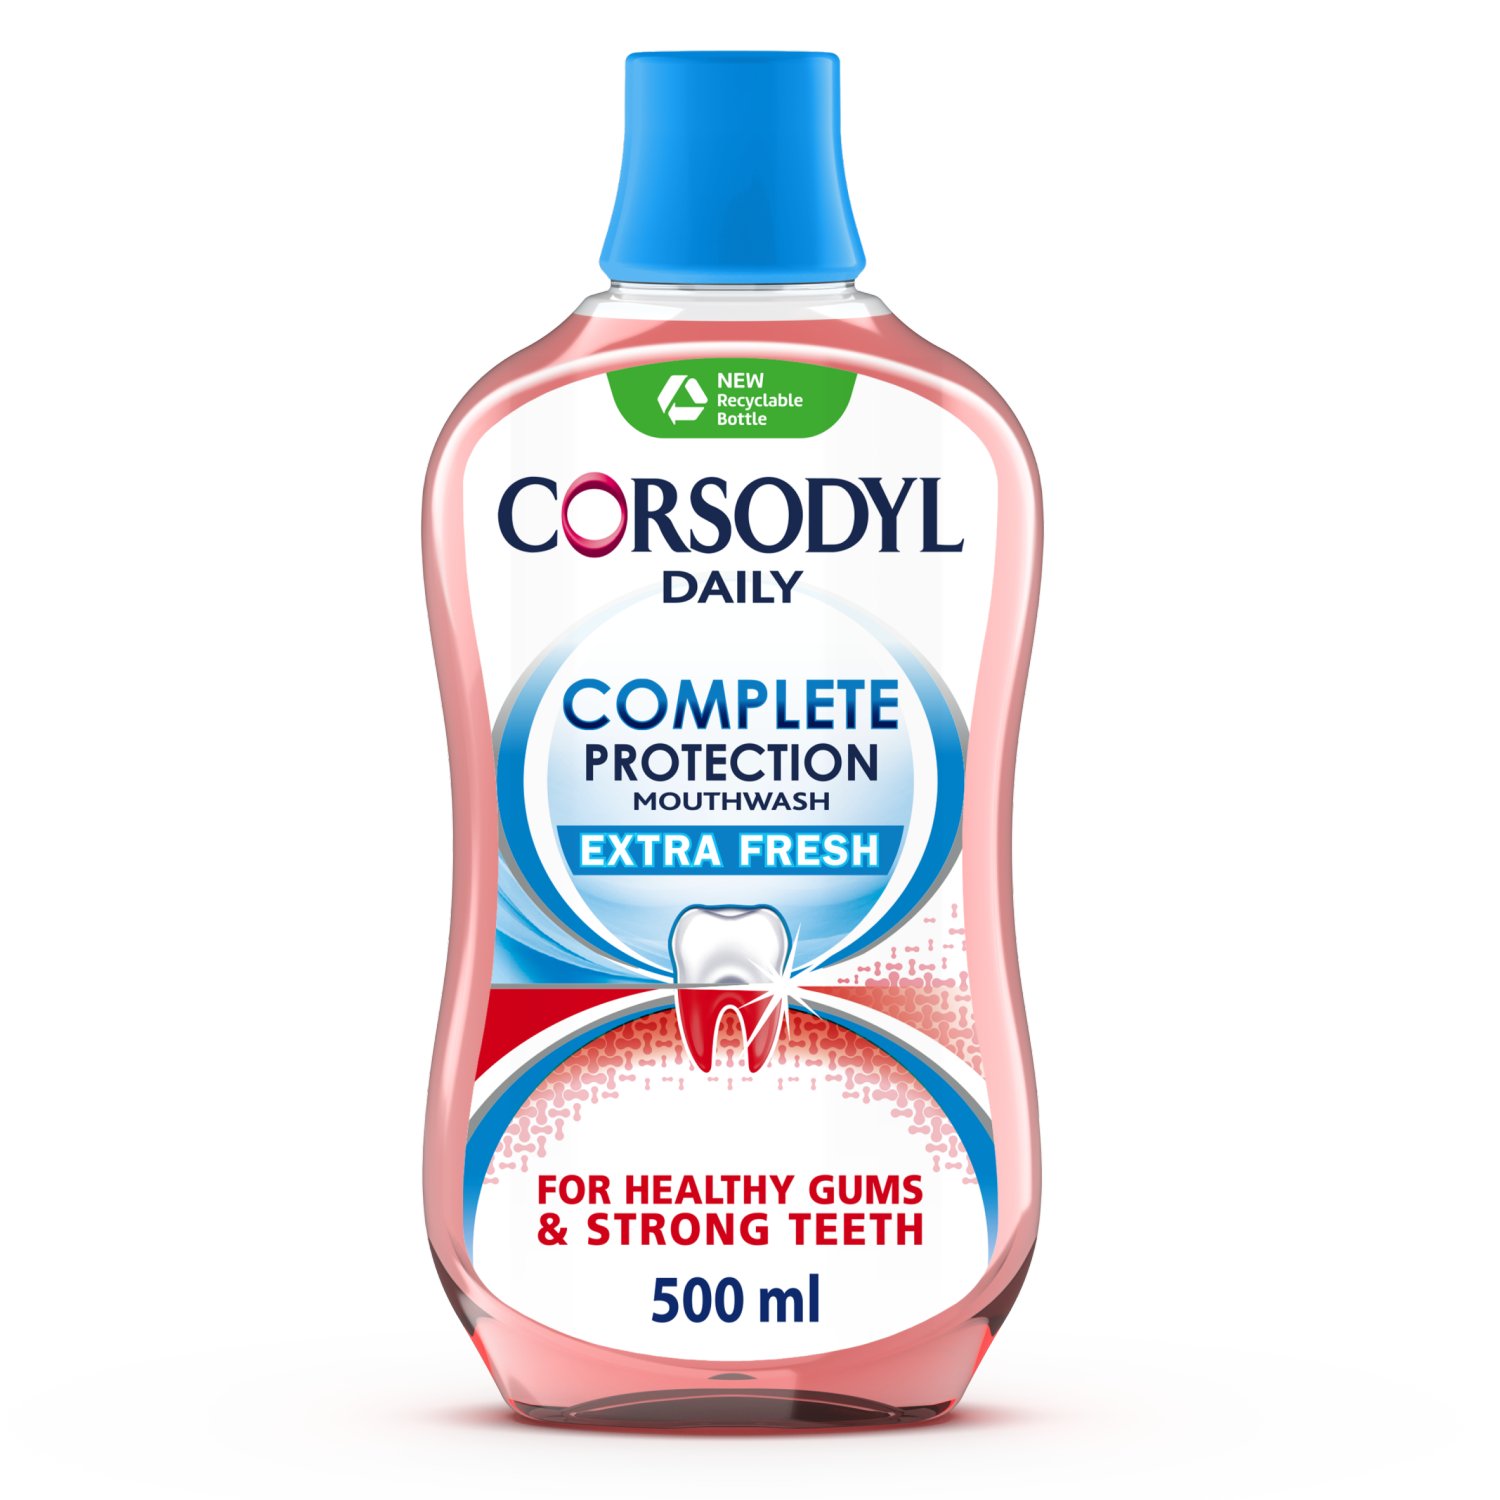  Corsodyl Complete Protection Mouthwash brings together the expertise behind our advanced gum mouthwash with your need to help keep your teeth strong, giving you 8 benefits for healthy gums, fresh breath, and strong teeth.  
  Healthy gums provide the foundation for strong teeth and a healthy mouth. That’s why gum care is important, there can be many problems if plaque bacteria isn't effectively removed daily.  
  Designed to be gentle on gums, Corsodyl Complete Protection formulation removes plaque bacteria from those hard-to-reach areas that your toothbrush can’t always reach, which can help to prevent bad breath and gum problems from returning.  
  More than an ordinary mouthwash, Complete Protection is alcohol-free, designed to leave no stains on teeth, and contains 8 specialised benefits, including:  • Freshens breath  • Strengthens enamel  • Cavity protection with fluoride  • Kills plaque bacteria that brushing leaves behind  • Helps keep gums healthy  • Cleans between the teeth  • Cleans along the gum line  • Protects the gum seal    
  Made with fluoride and zinc, use this Corsodyl mouthwash after brushing with Corsodyl Daily Toothpaste as part of a healthy oral routine to help keep gums healthy, teeth strong, and breath fresh.  
  This specialist gum health mouthwash comes in an Extra Fresh flavour.   
  Bottle and cap are recyclable** 
1. Used daily as part of your oral hygiene routine it helps promote and maintain a healthy gum seal
2. Made to actively target 3x more plaque bacteria* and helps to improve gum health. *vs brushing alone
3. Scientifically proven to help keep gums and teeth healthy
4. The therapeutic taste leaves you with a healthy and fresh sensation in the whole mouth
5. Bottle and cap recyclable**